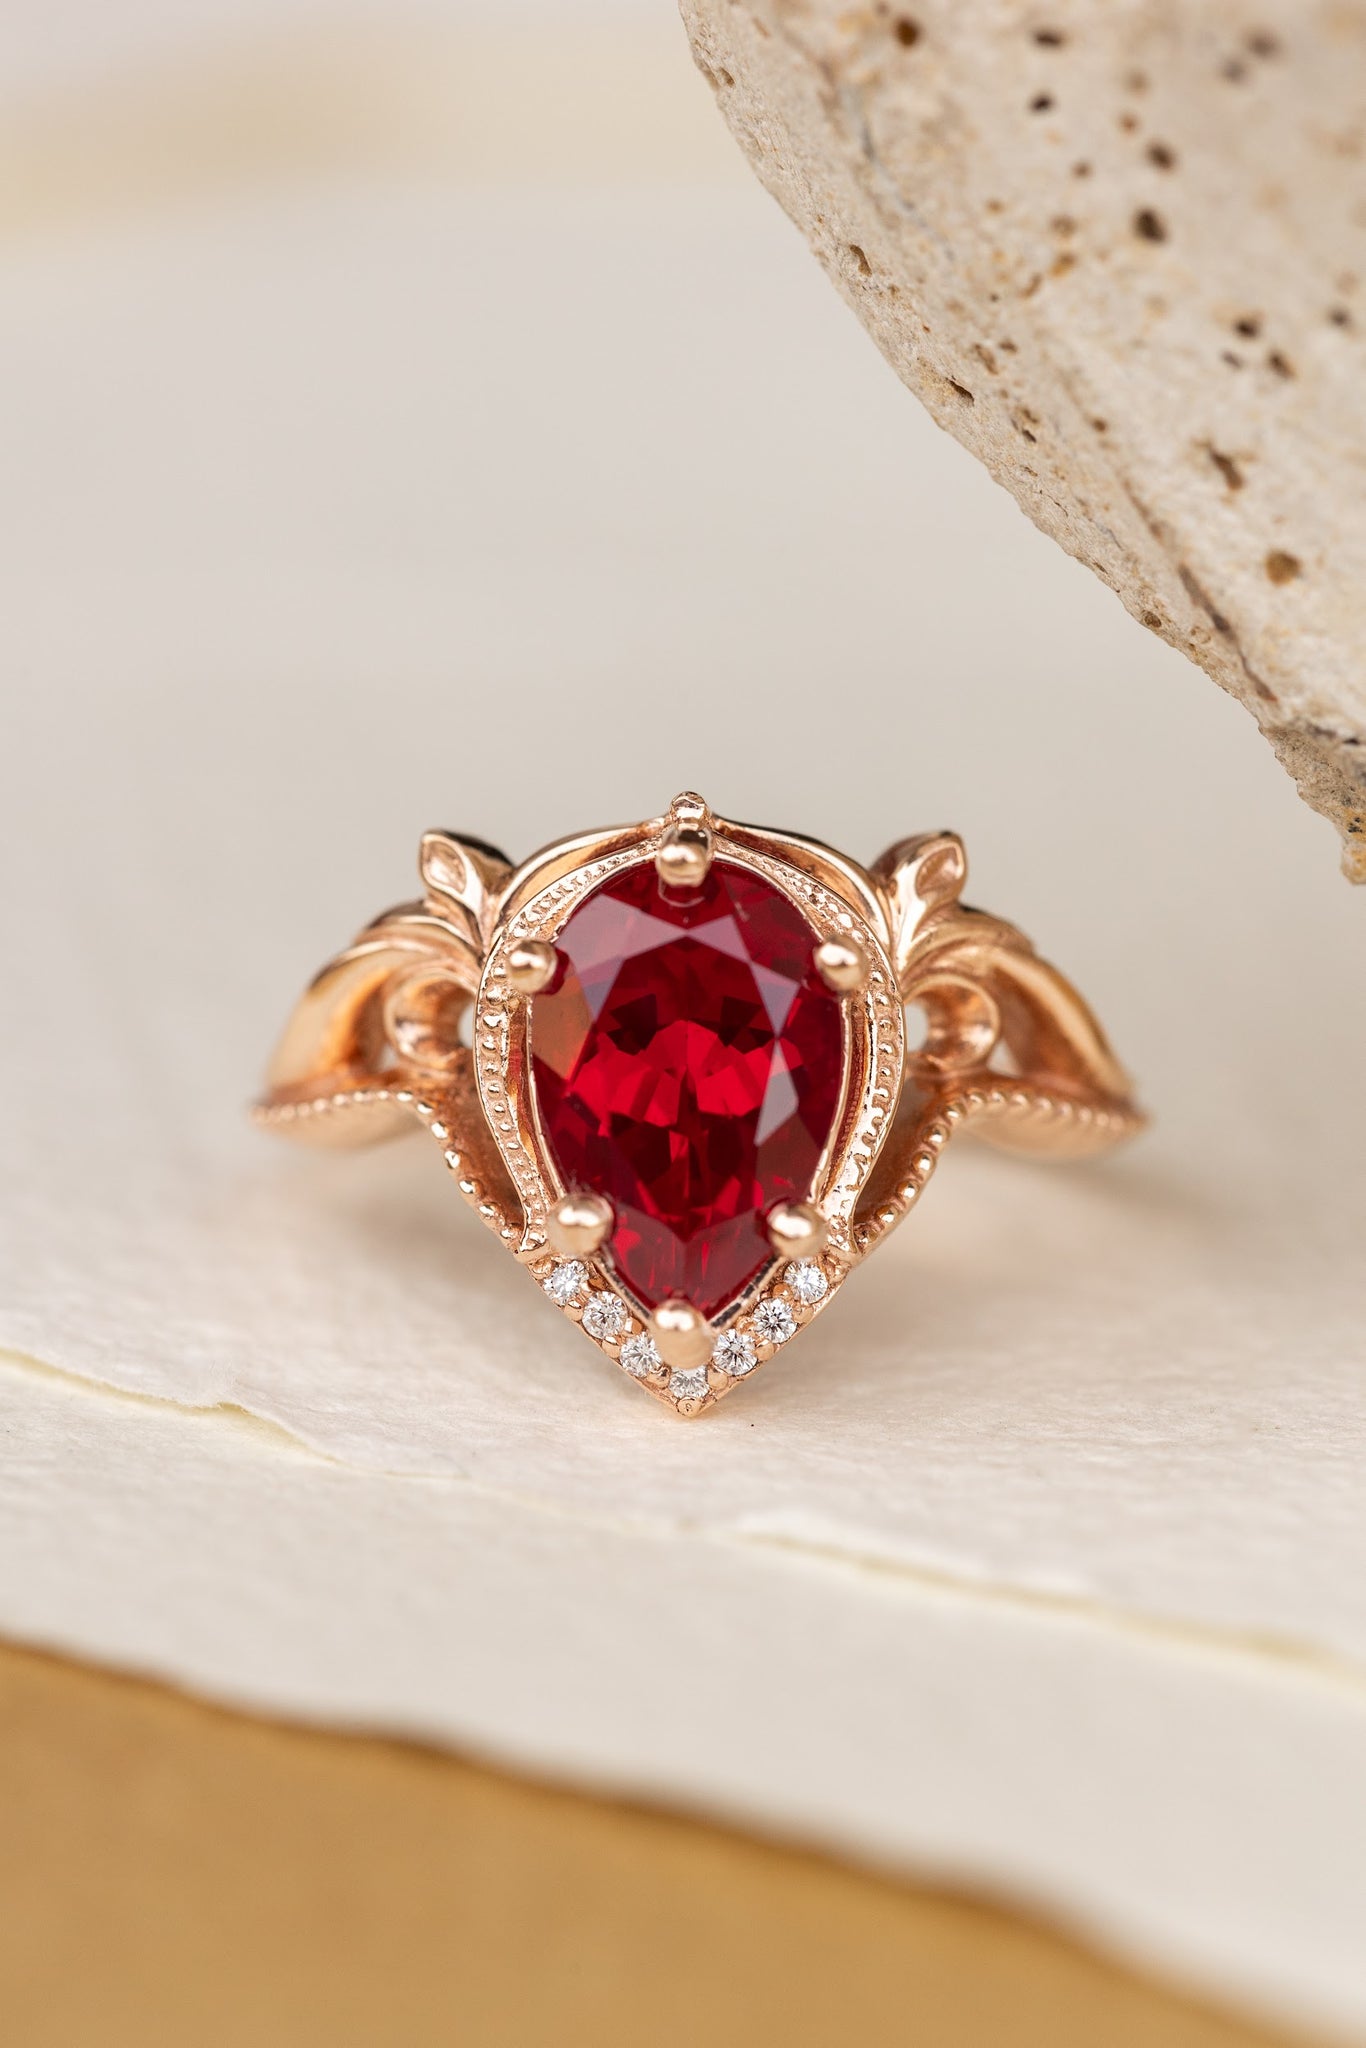 Lab ruby and diamonds engagement ring, big pear shape gemstone promise ring  / Lida - Eden Garden Jewelry™